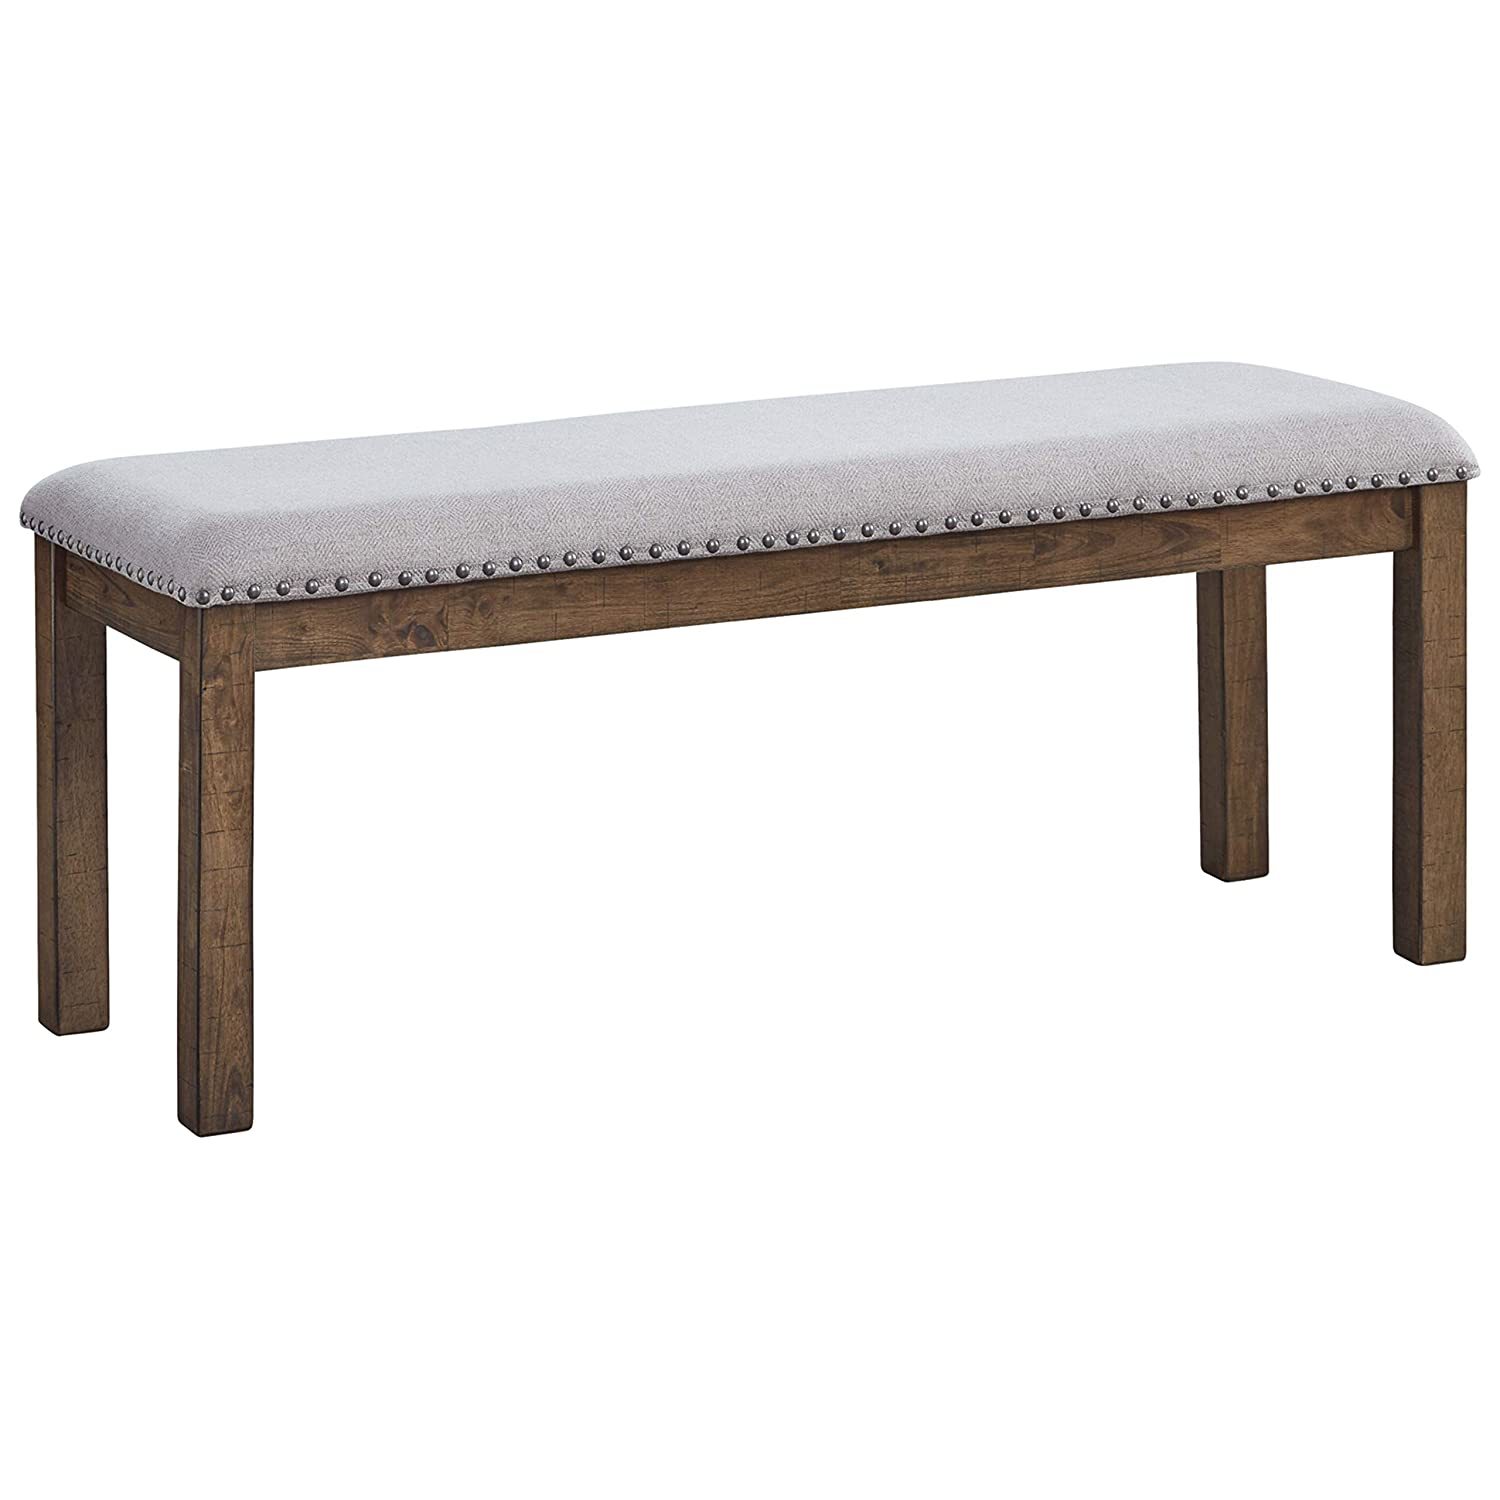 Signature Design by Ashley Moriville Casual Rustic Upholstered Dining Bench, Bei - $164.34